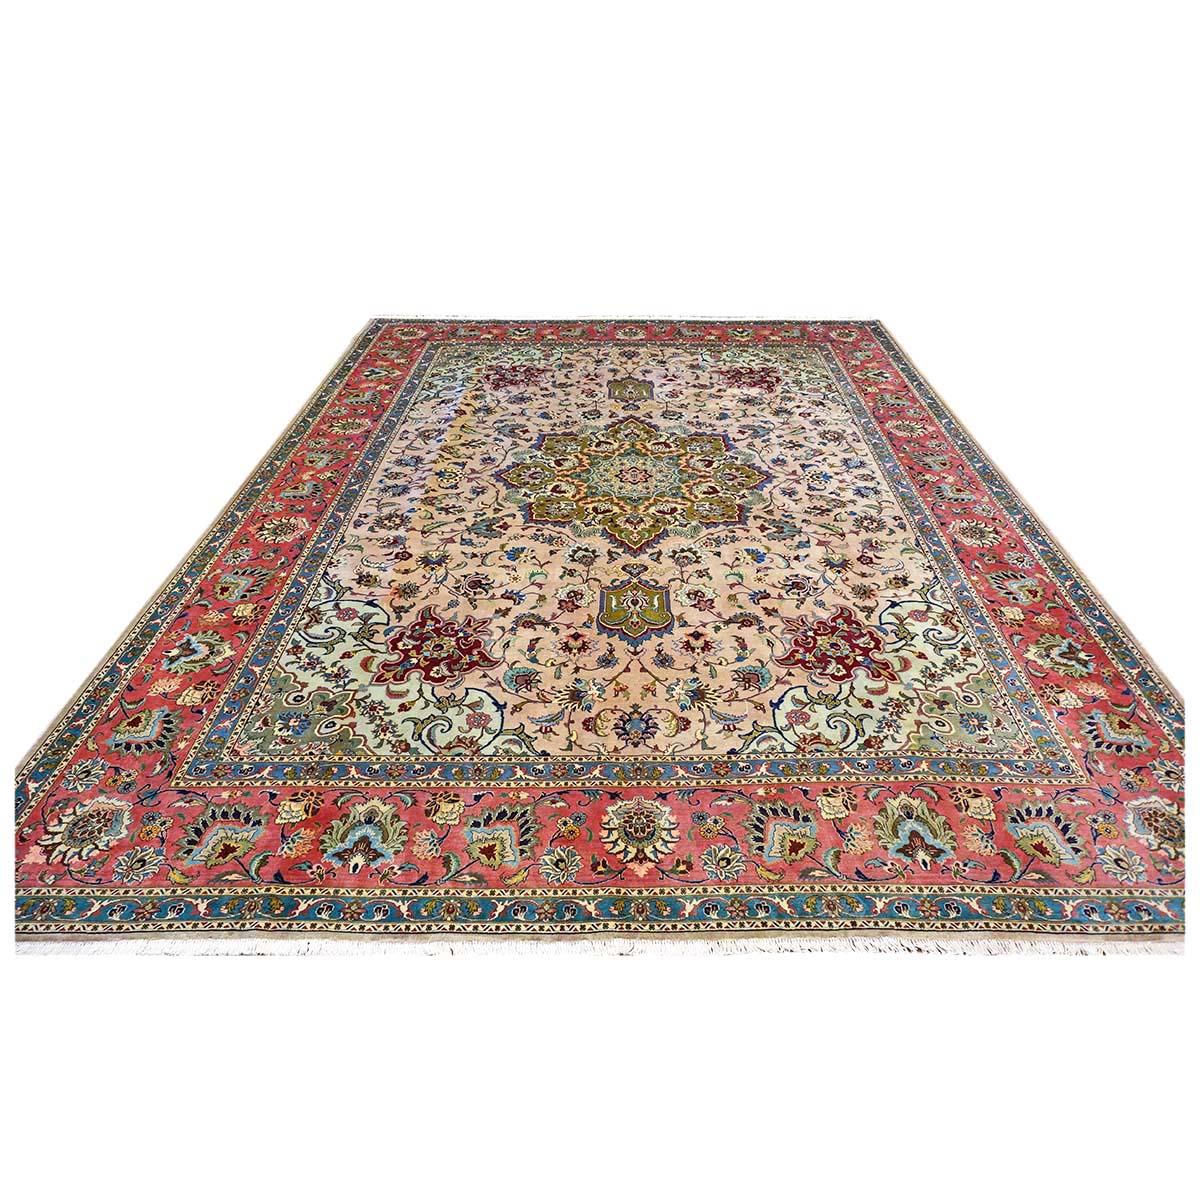 Hand-Woven Antique Persian Tabriz 9x12 Red, Green, & Ivory Handmade Area Rug For Sale